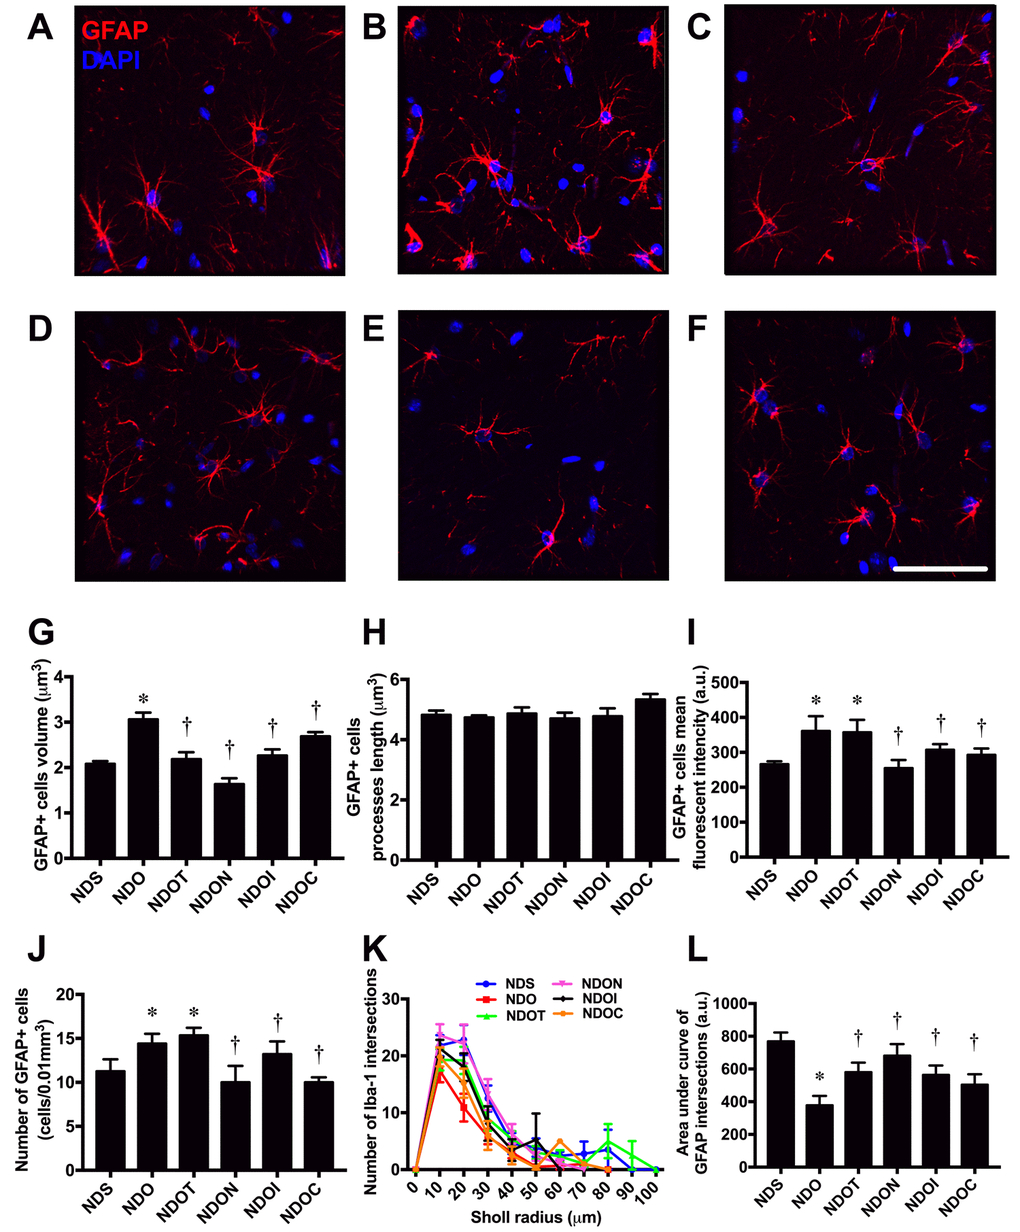 The effects of NAC, inulin and combined therapy on astrocyte morphology in rats with testosterone deprivation. (A-F) Representative images of GFAP and DAPI immunofluorescence under confocal microscopy at CA1 of the hippocampus of NDS, NDO, NDOT, NDON, NDOI, and NDOC respectively (bar = 50 𝜇m). (G) Size of astrocyte cells as indicated by GFAP positive cell volume. (H) Length of astrocyte processes as indicated by GFAP positive cells processes length. (I) Mean fluorescent intensity of GFAP positive cells. (J) Number of astrocyte cells as indicated by number of GFAP positive cells. (K-L) The ramification of astrocyte cells as indicated by Sholl analysis and area under the curve of GFAP intersection respectively. NDS: rats with sham operation; NDO: rats with orchiectomy; NDOT: rats with orchiectomy receiving testosterone replacement; NDON: rats with orchiectomy receiving NAC treatment; NDOI: rats with orchiectomy receiving inulin treatment; NDOC: rats with orchiectomy receiving the combined therapy (the combination of NAC and inulin) (N=6 of each group) *p